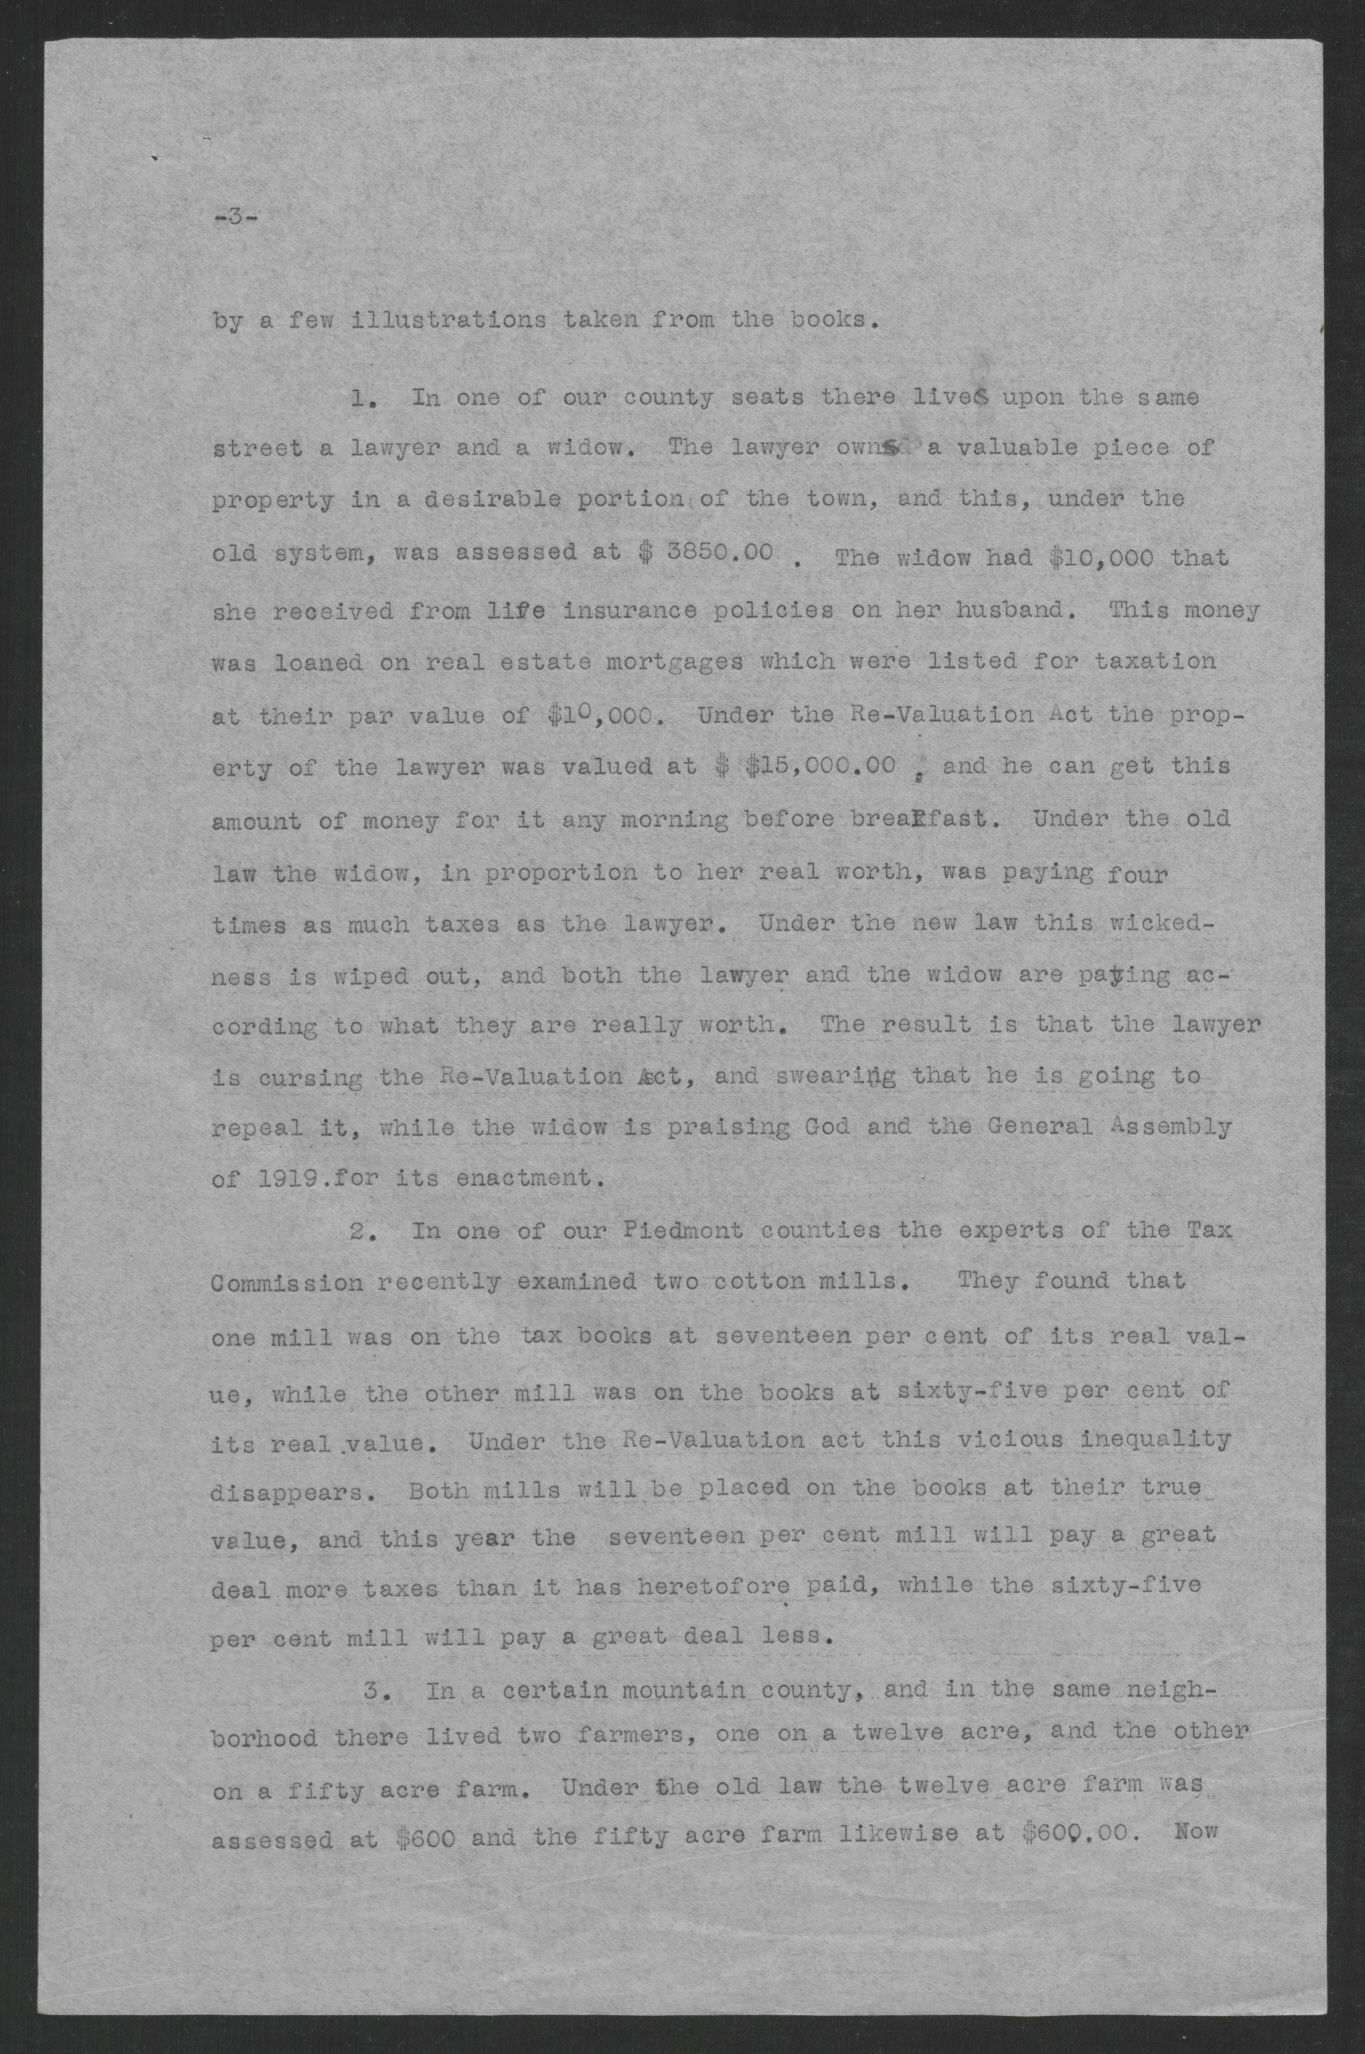 Press Statement by Thomas W. Bickett on the Revaluation Act, February 23, 1920, page 3